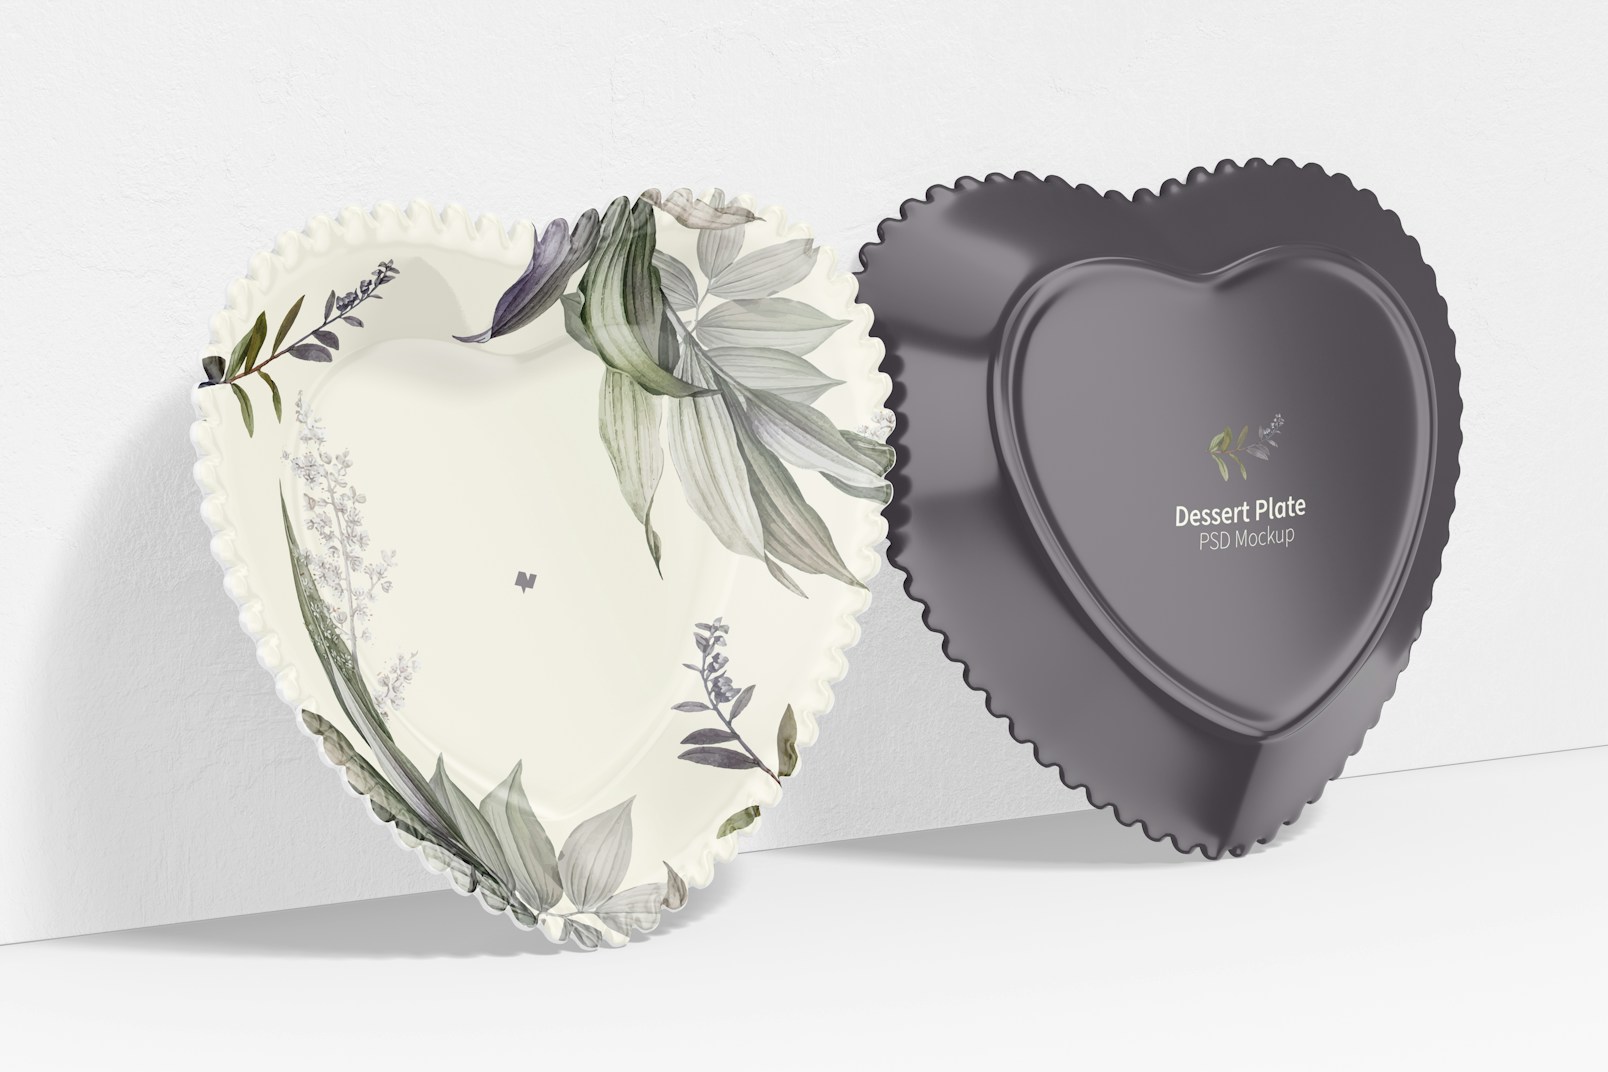 Heart Shaped Dessert Plates Mockup, Front and Back View